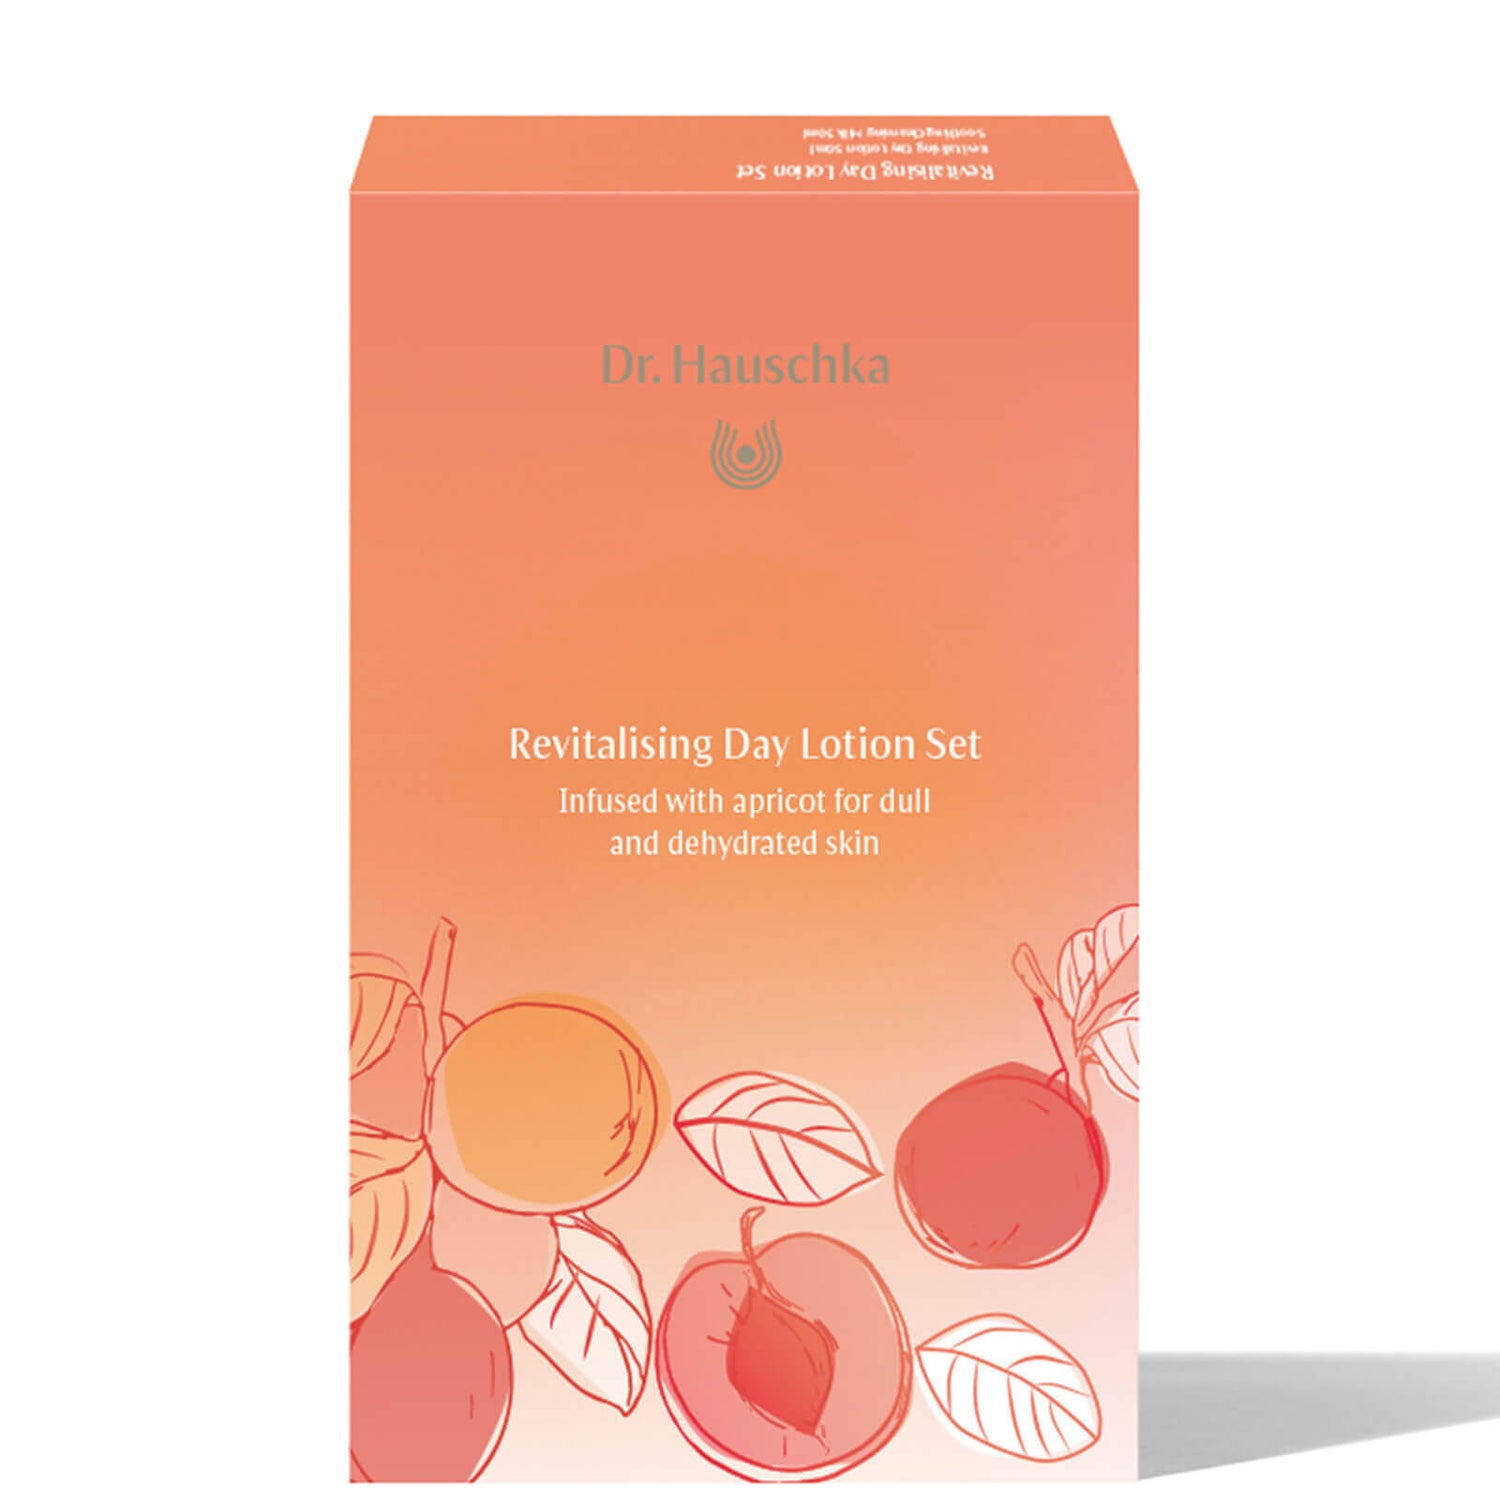 Dr. Hauschka Revitalsing Day Lotion Set